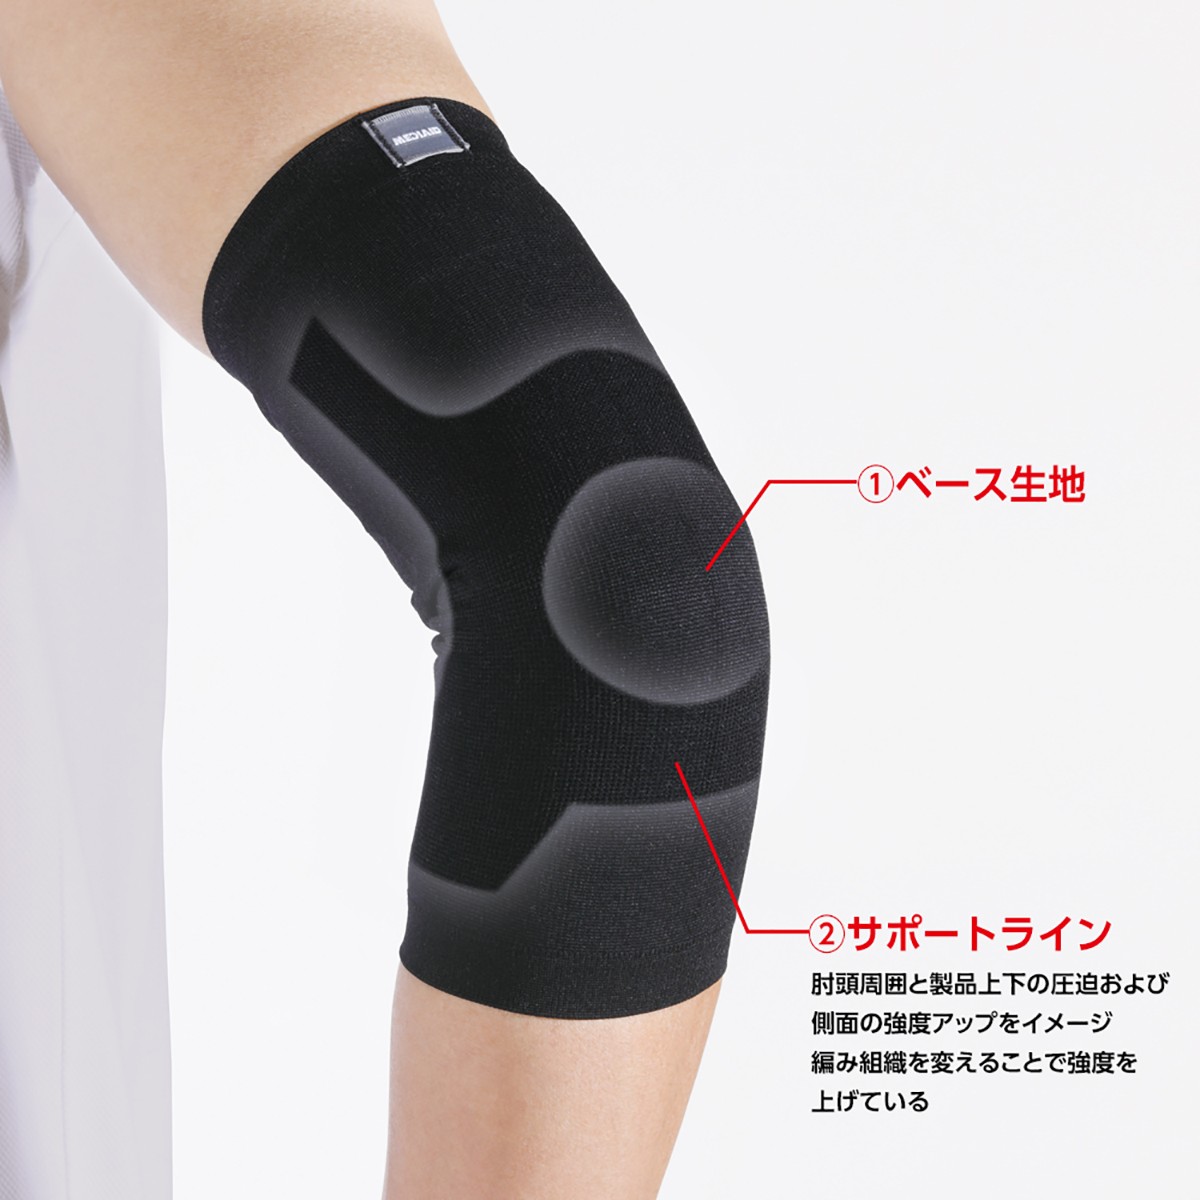 [ medical care Manufacturers made in Japan ] elbow supporter elbow arm pain meti aid neat Fit hiji made in Japan hiji.. pain protection medical care for left right combined use man and woman use 